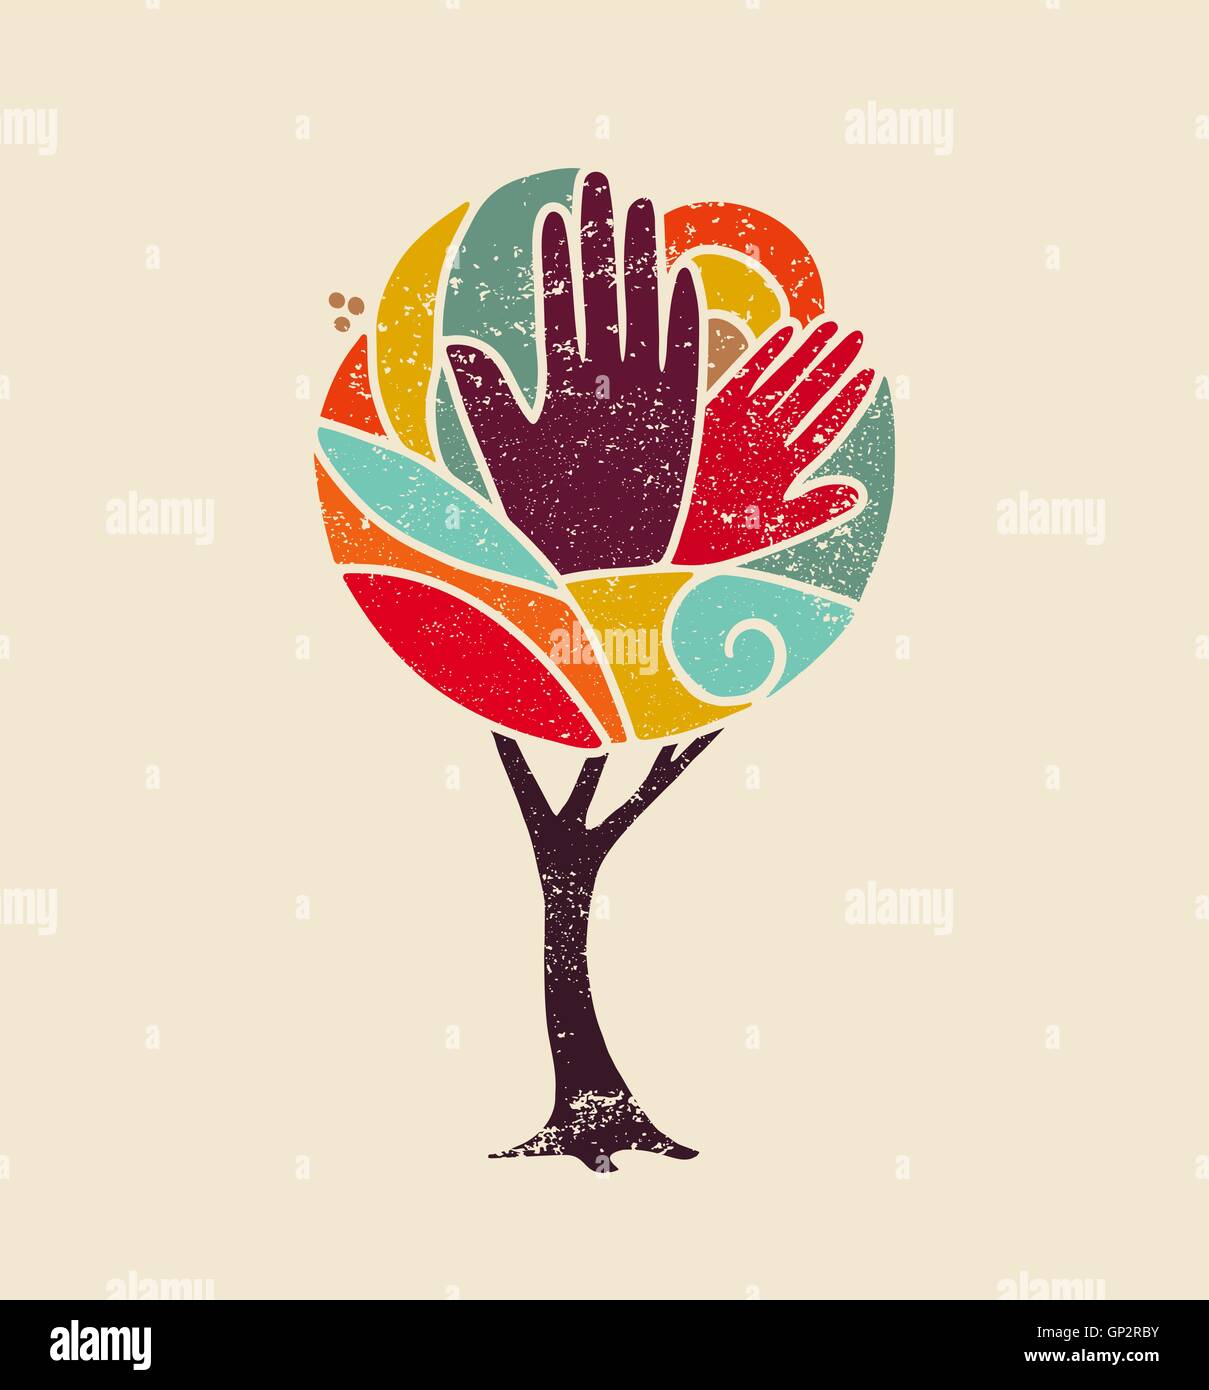 Colorful grunge concept tree art with people hands and nature design for social diversity, environment help. EPS10 vector. Stock Vector